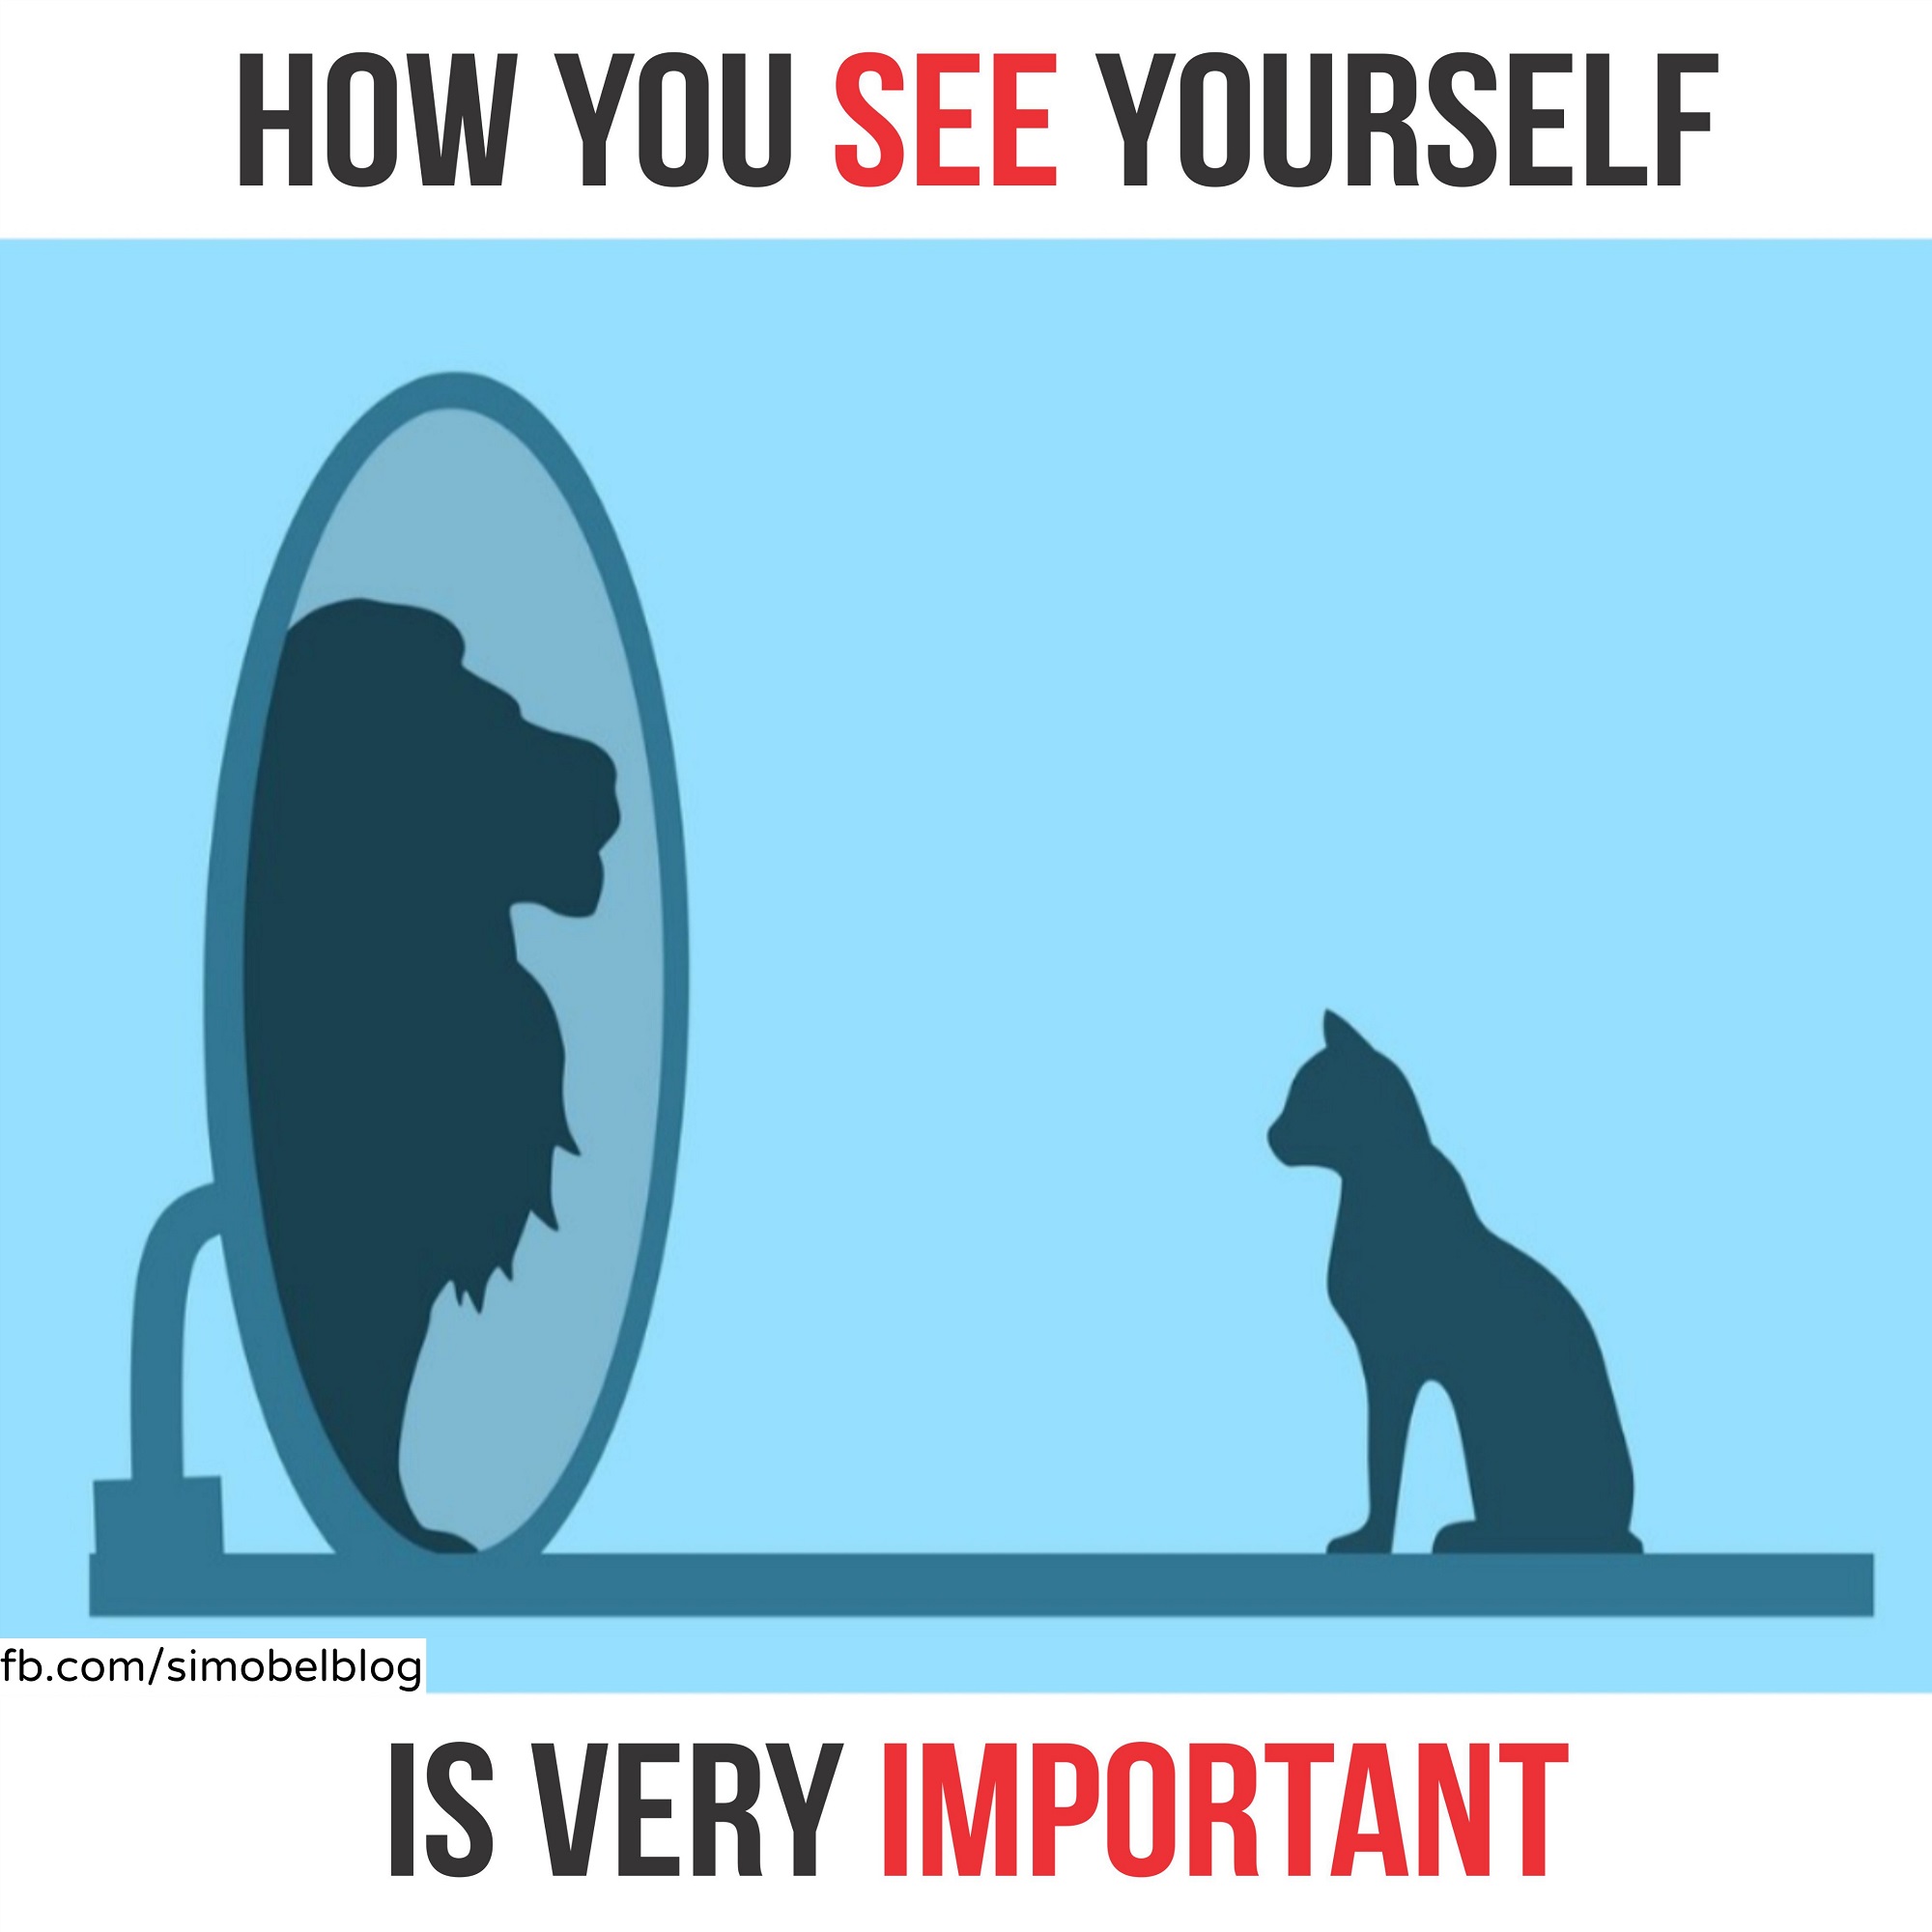 How you see yourself is very important